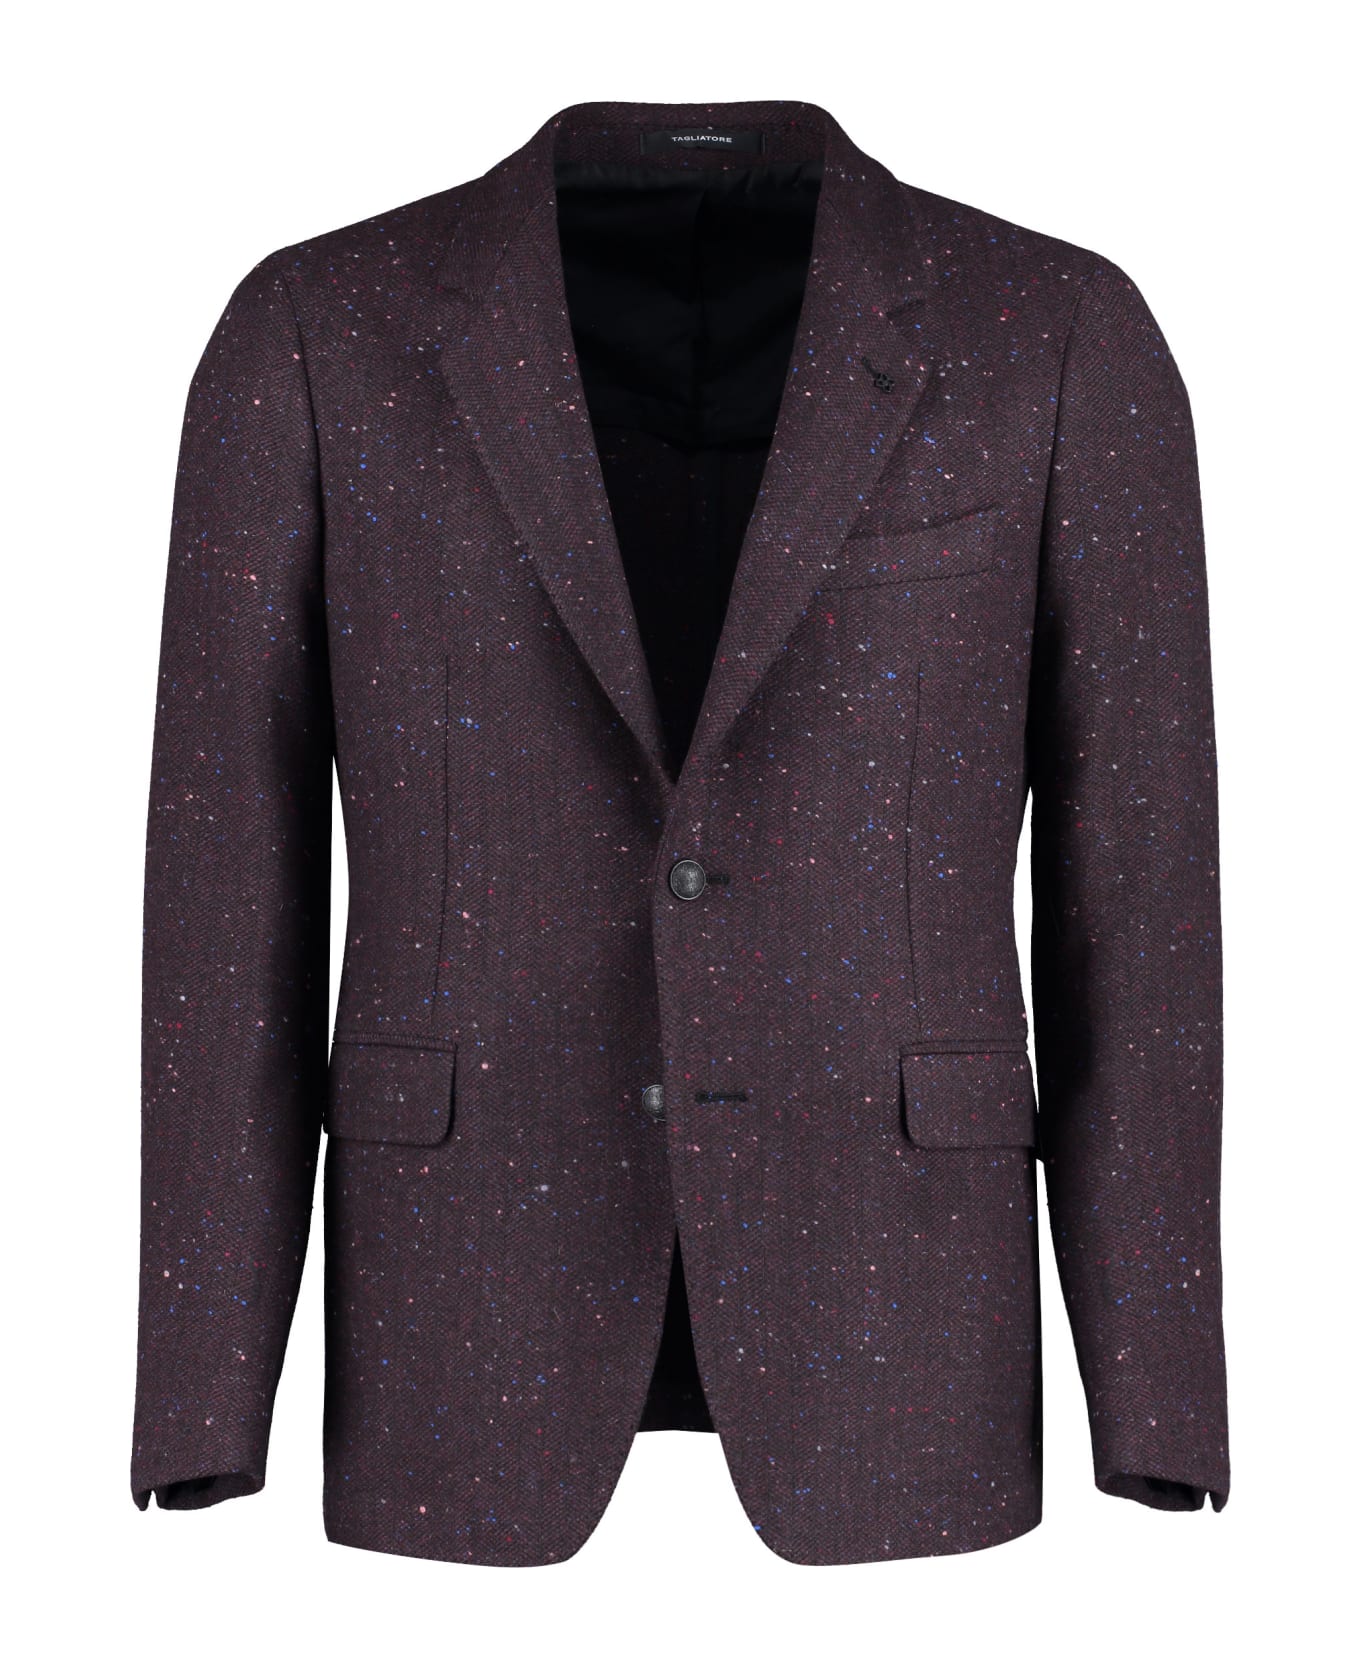 Tagliatore Single-breasted Two-button Jacket - Burgundy